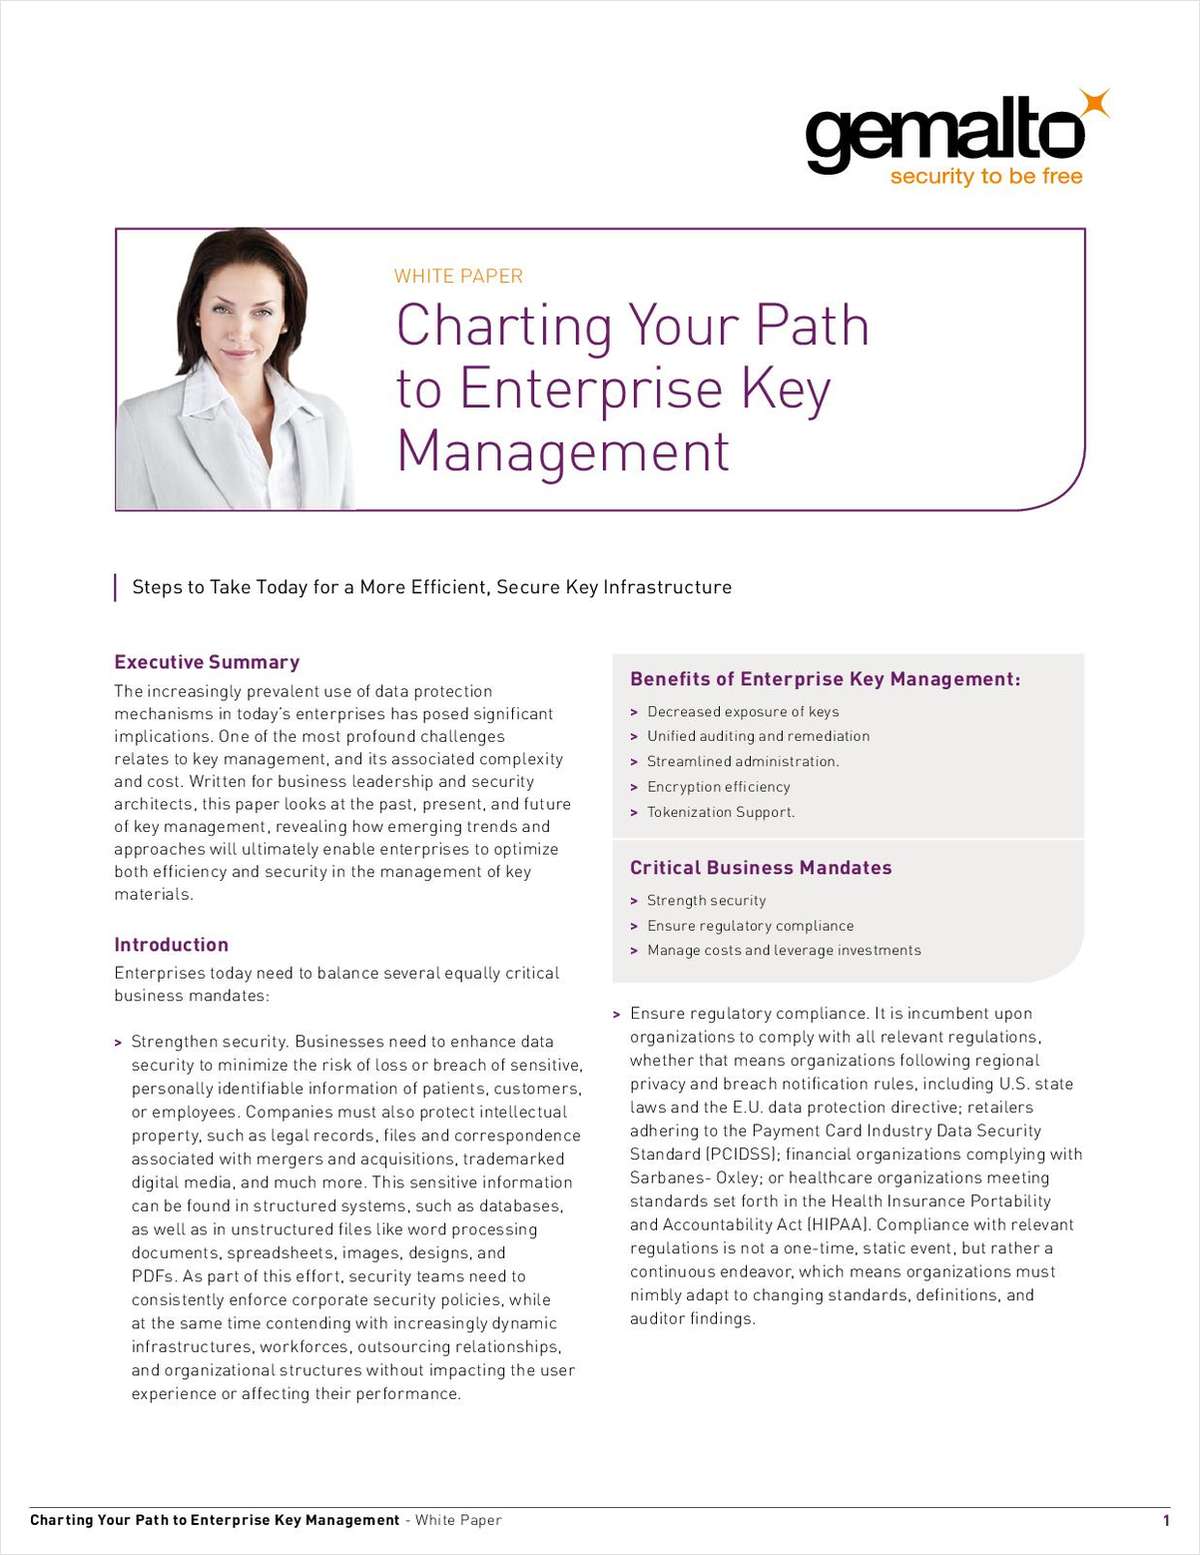 Charting Your Path to Enterprise Key Management